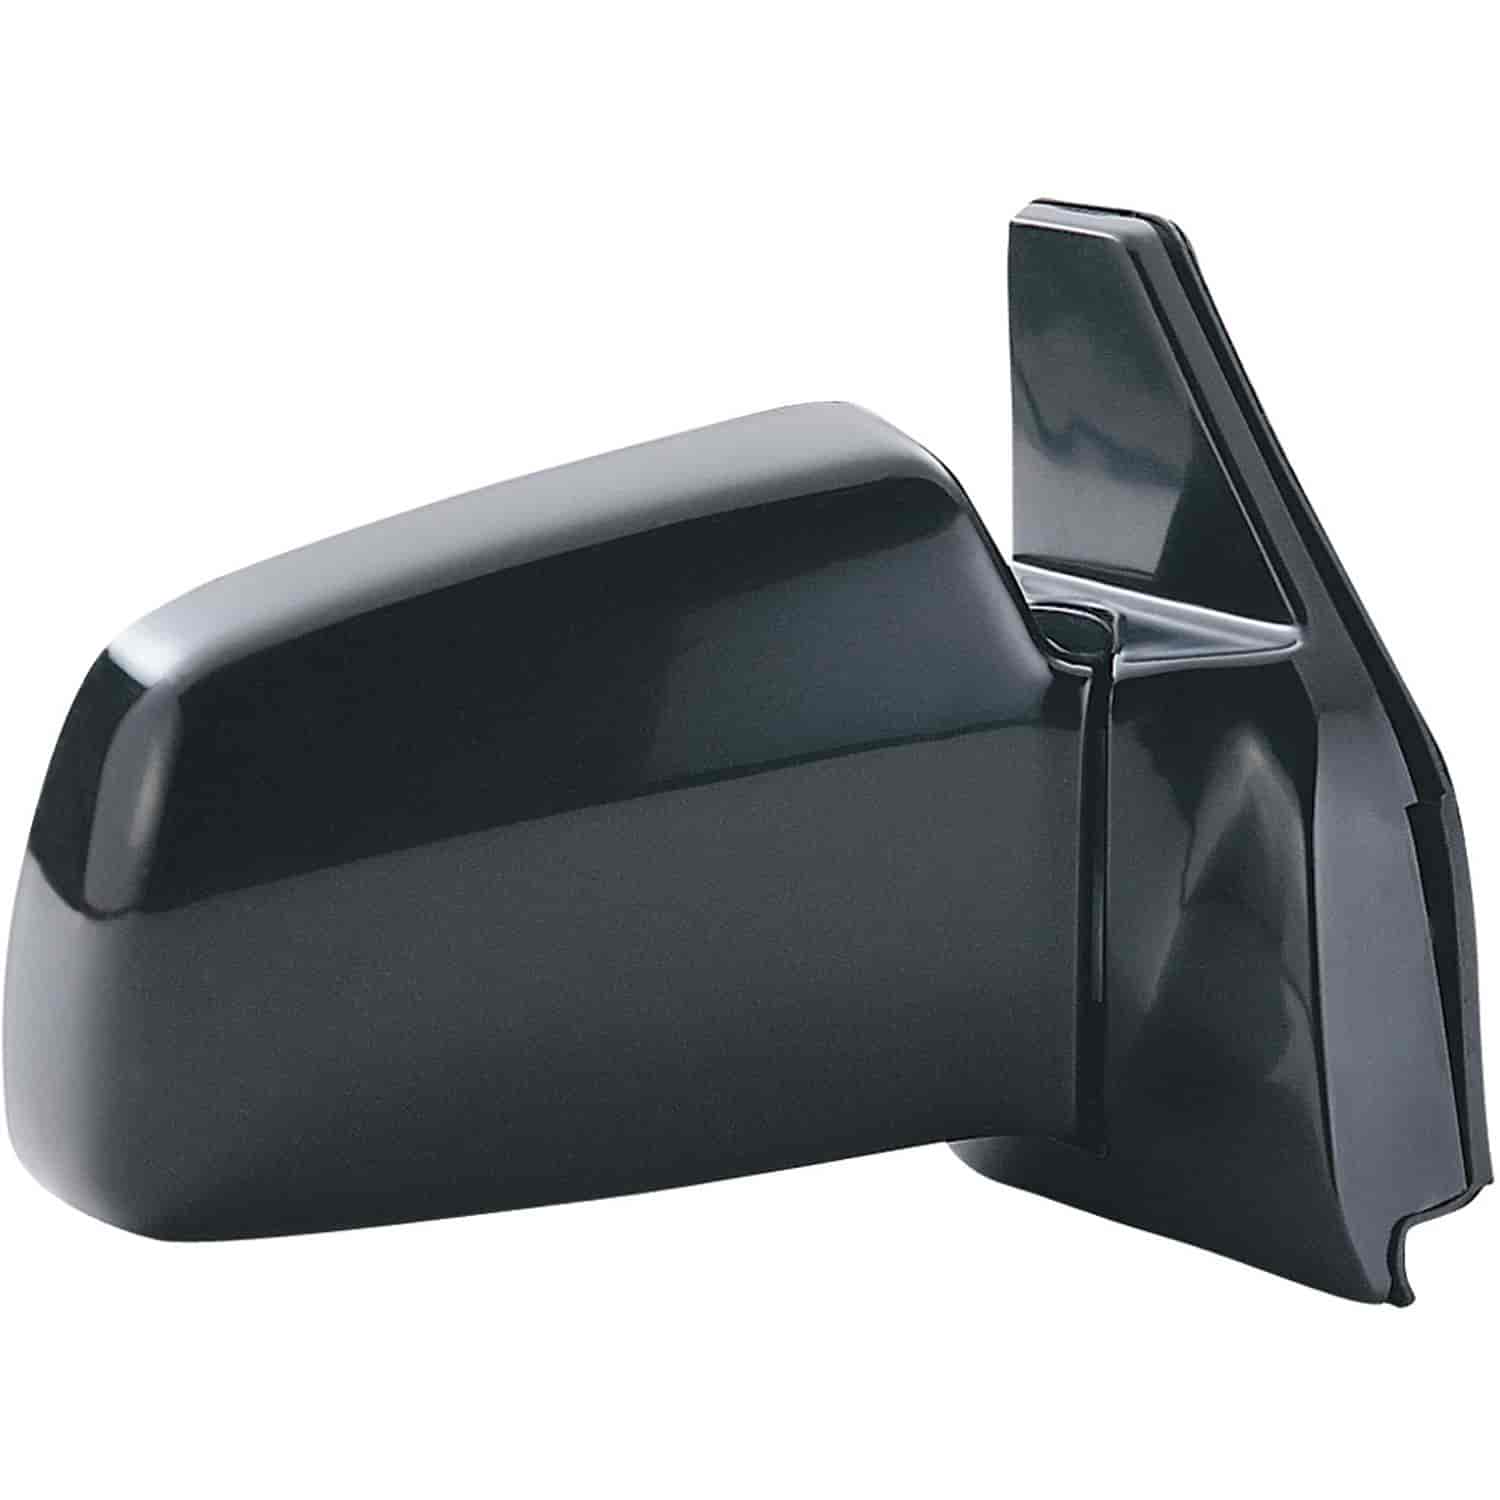 OEM Style Replacement mirror for 89-98 Suzuki kick 2 door passenger side mirror tested to fit and fu